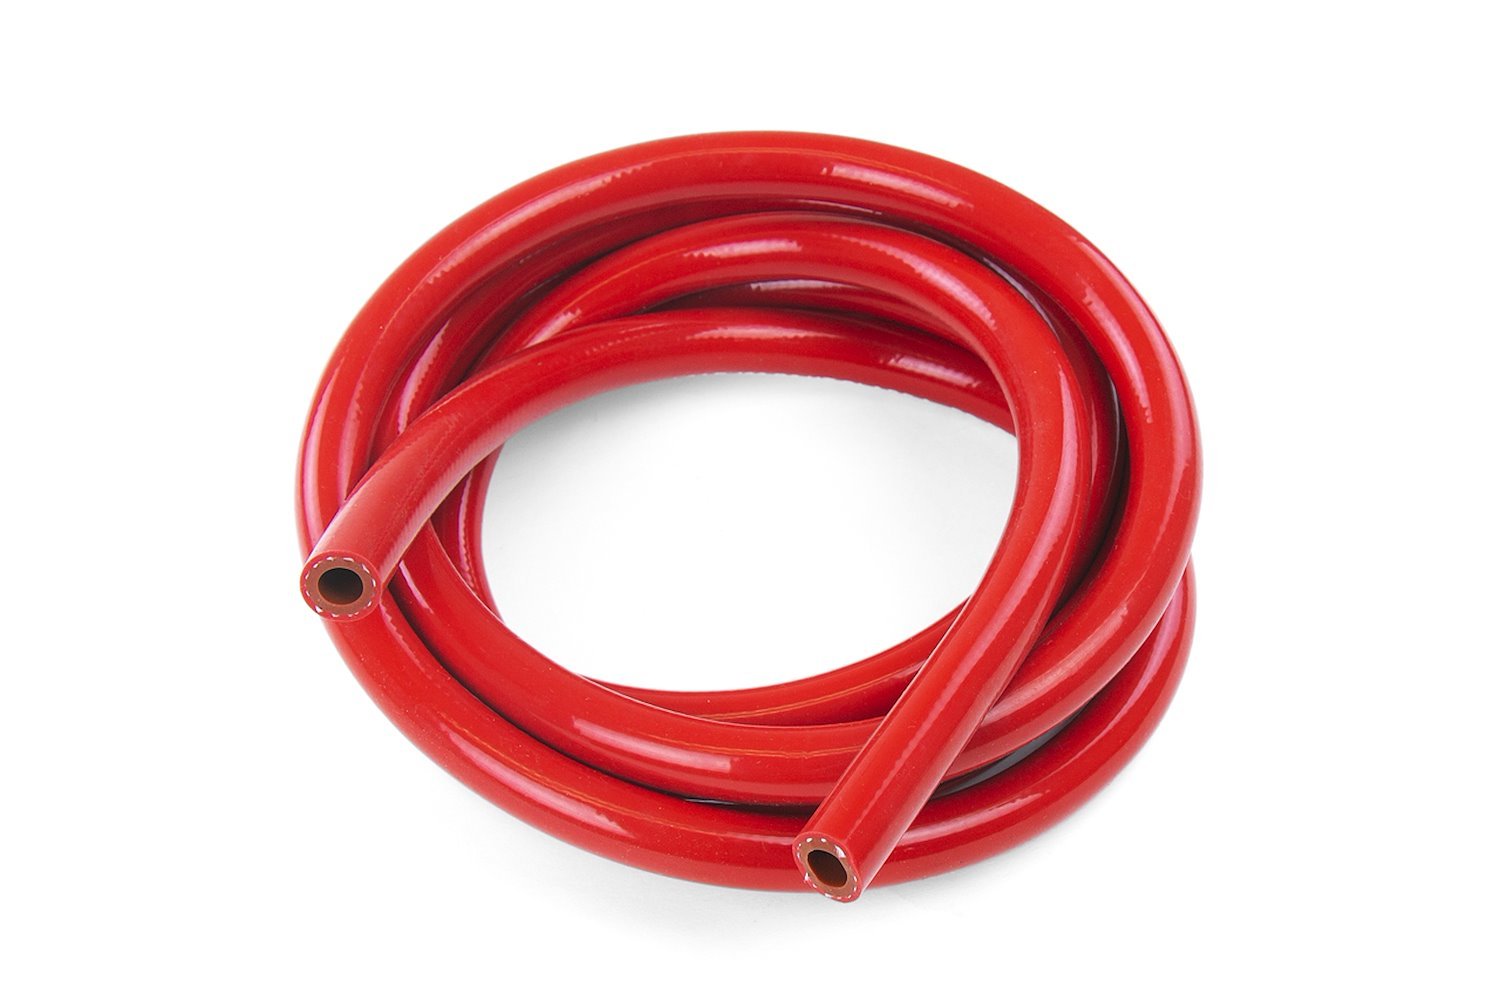 HTHH-050-REDx10 Silicone Heater Hose Tubing, High-Temp 1-Ply Reinforced, 1/2 in. ID, 10 ft. Roll, Red